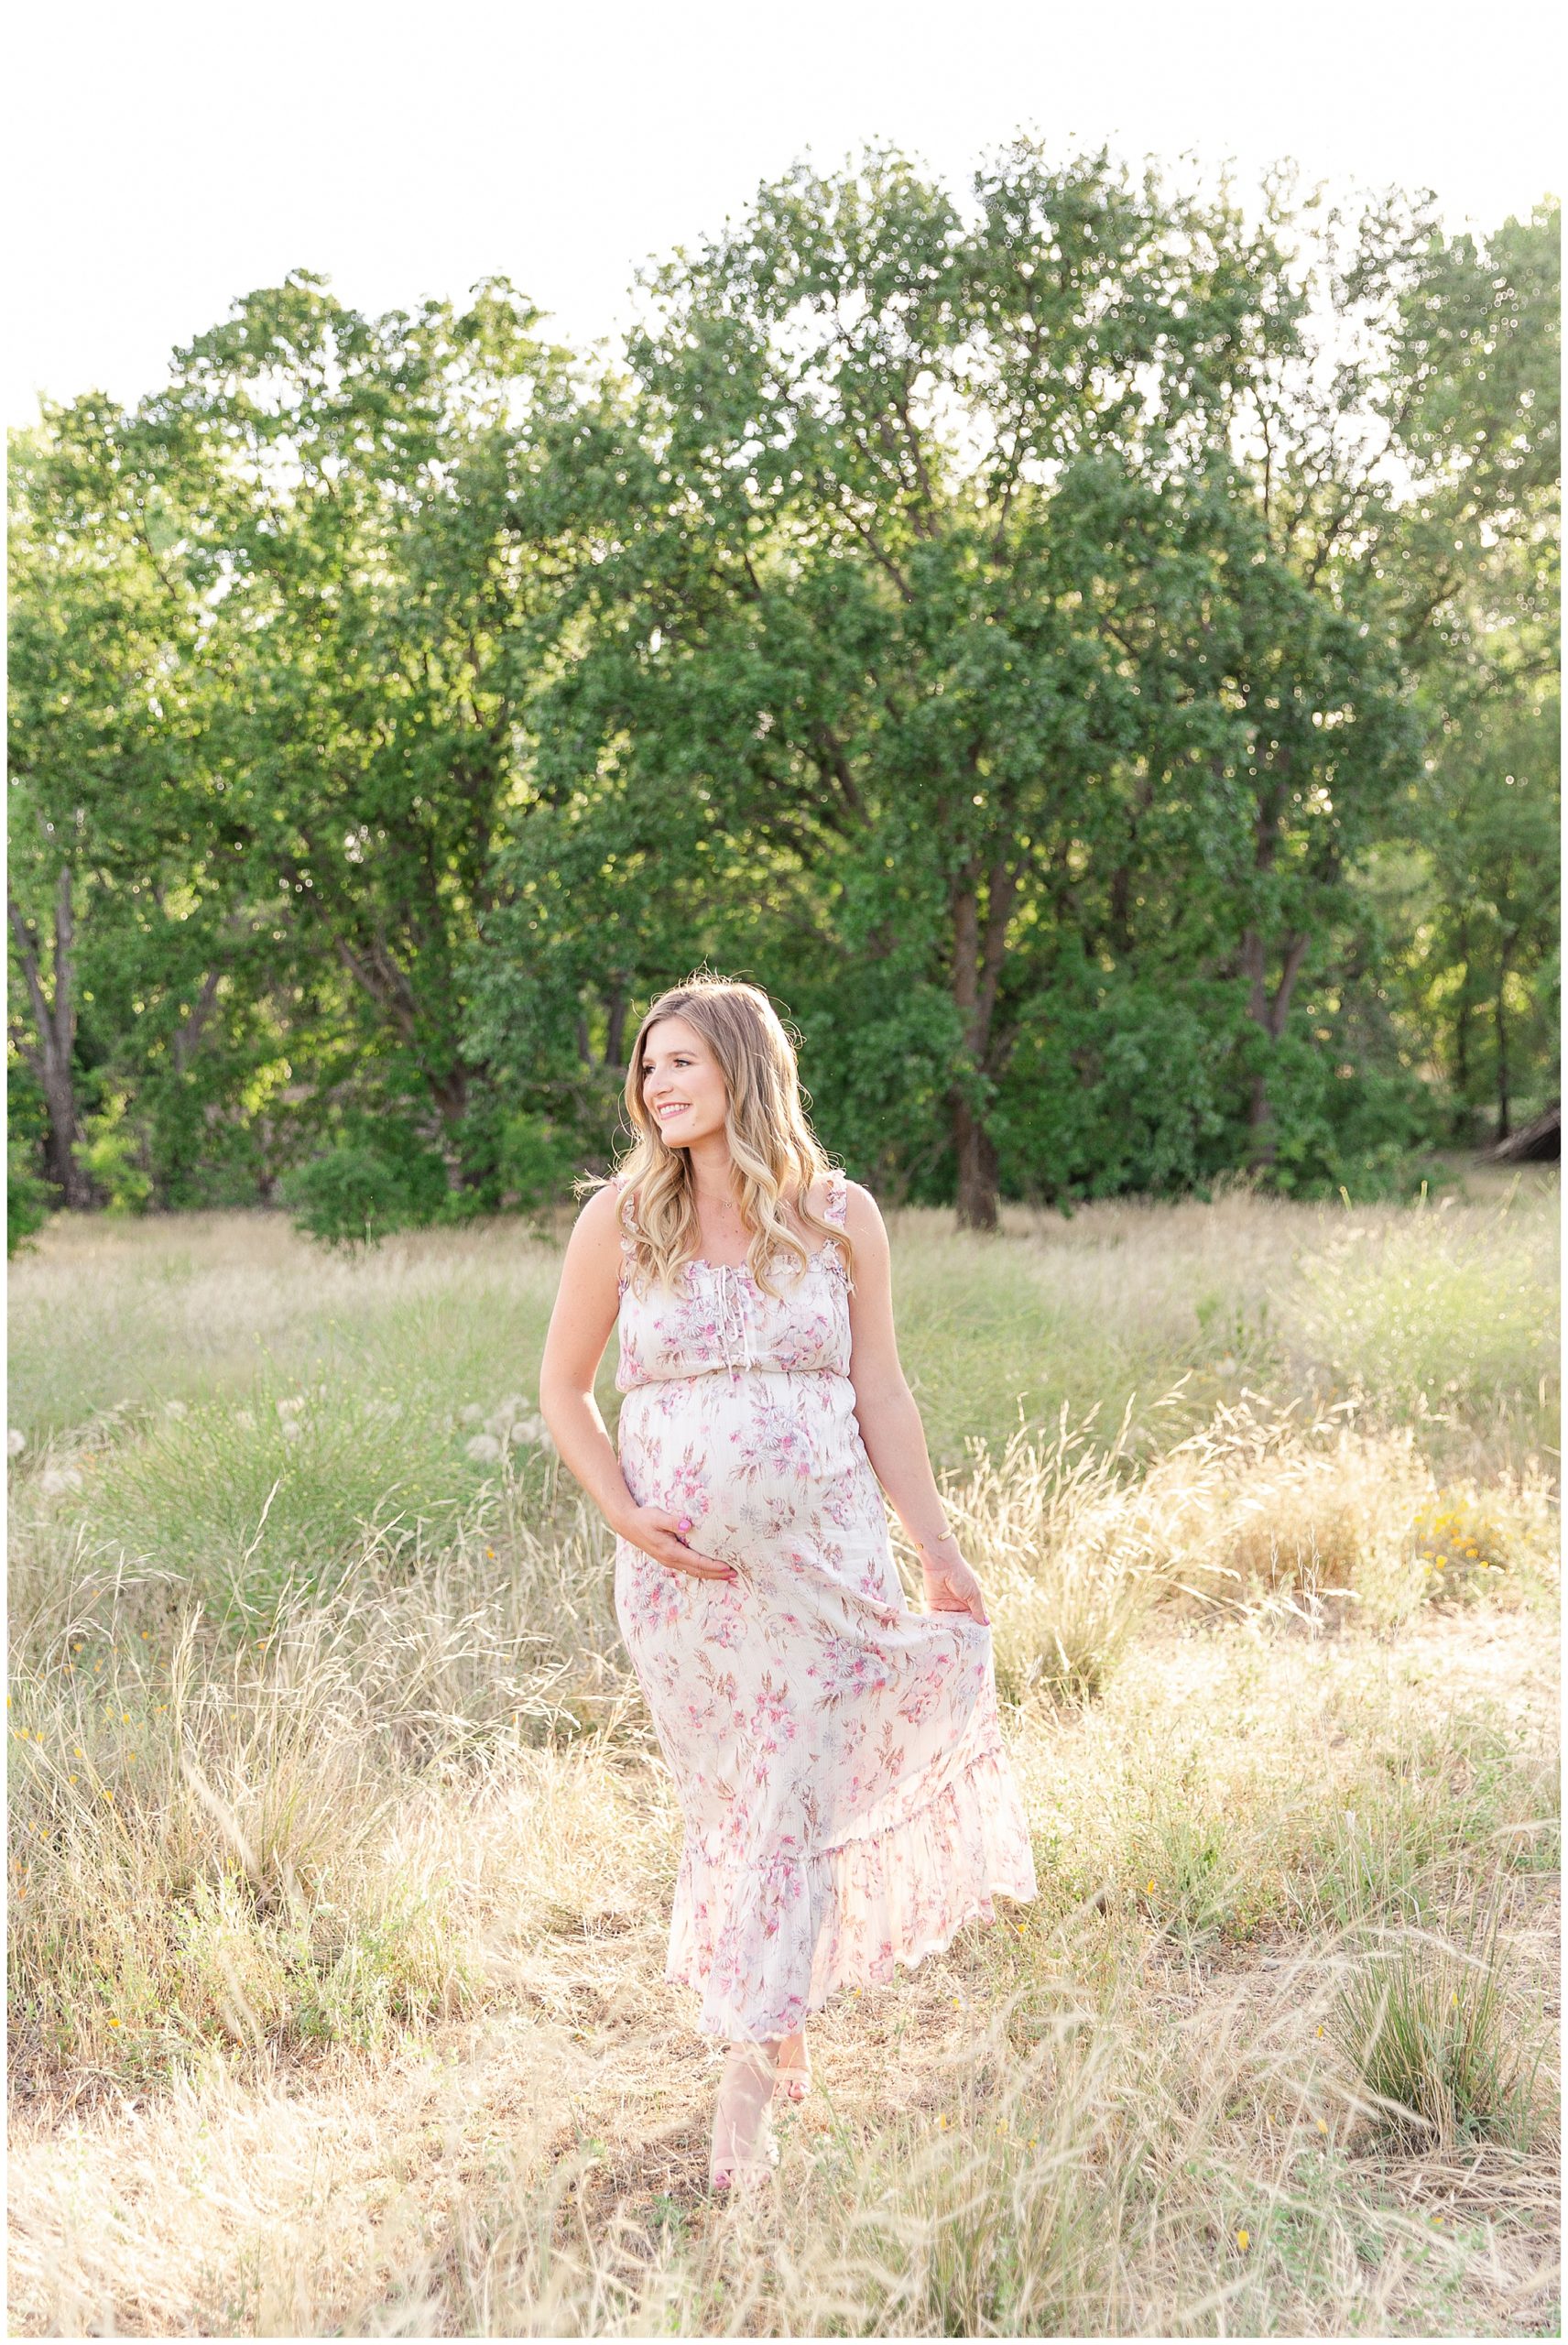 Maternity Session Walking in Grass Field | Andie + Steven